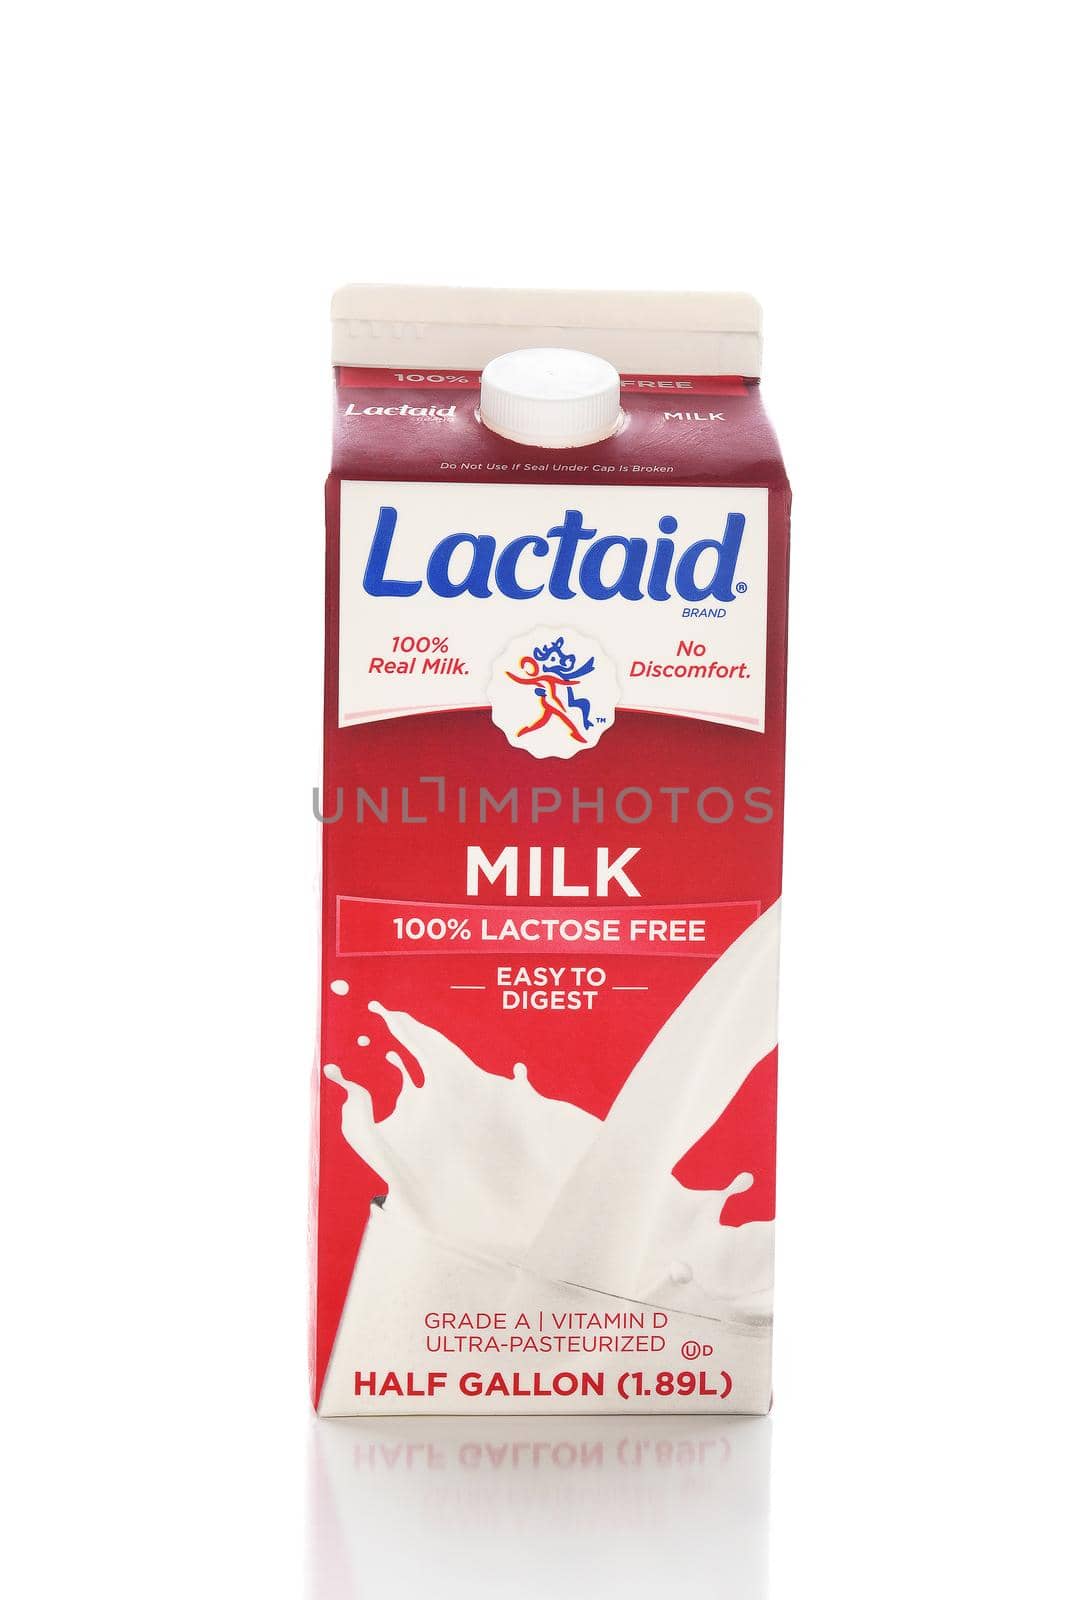 IRVINE, CALIFORNIA - NOVEMBER 16, 2016: A half gallon carton of Lactaid Lactose Free Milk. Lactaid makes a full line of lactose free dairy products that can be enjoyed without stomach discomfort.